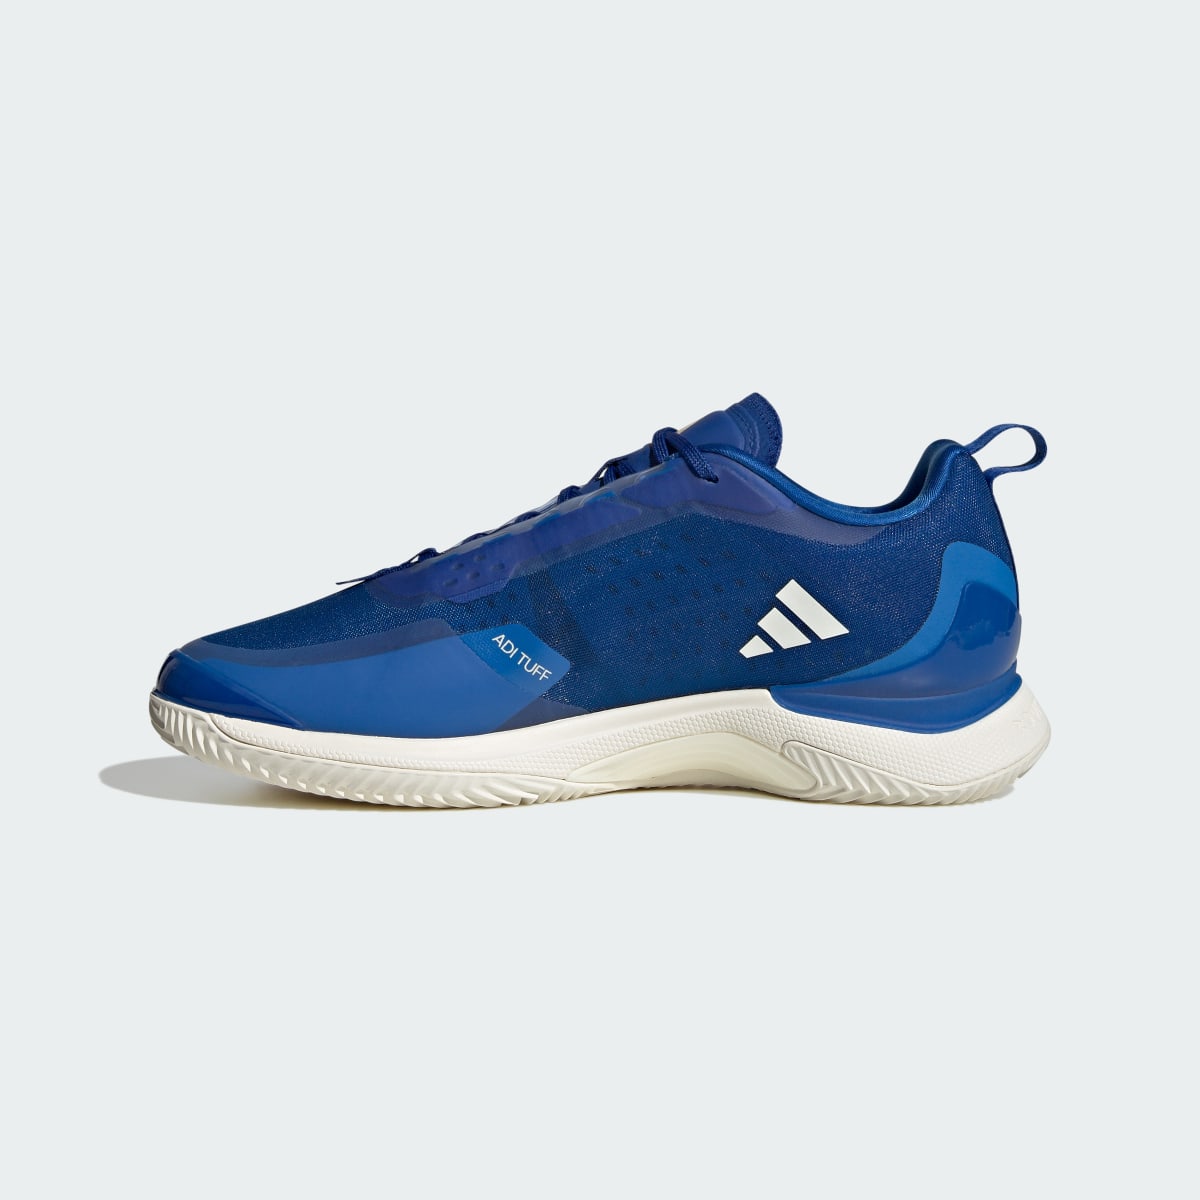 Adidas Avacourt Clay Court Tennis Shoes. 7